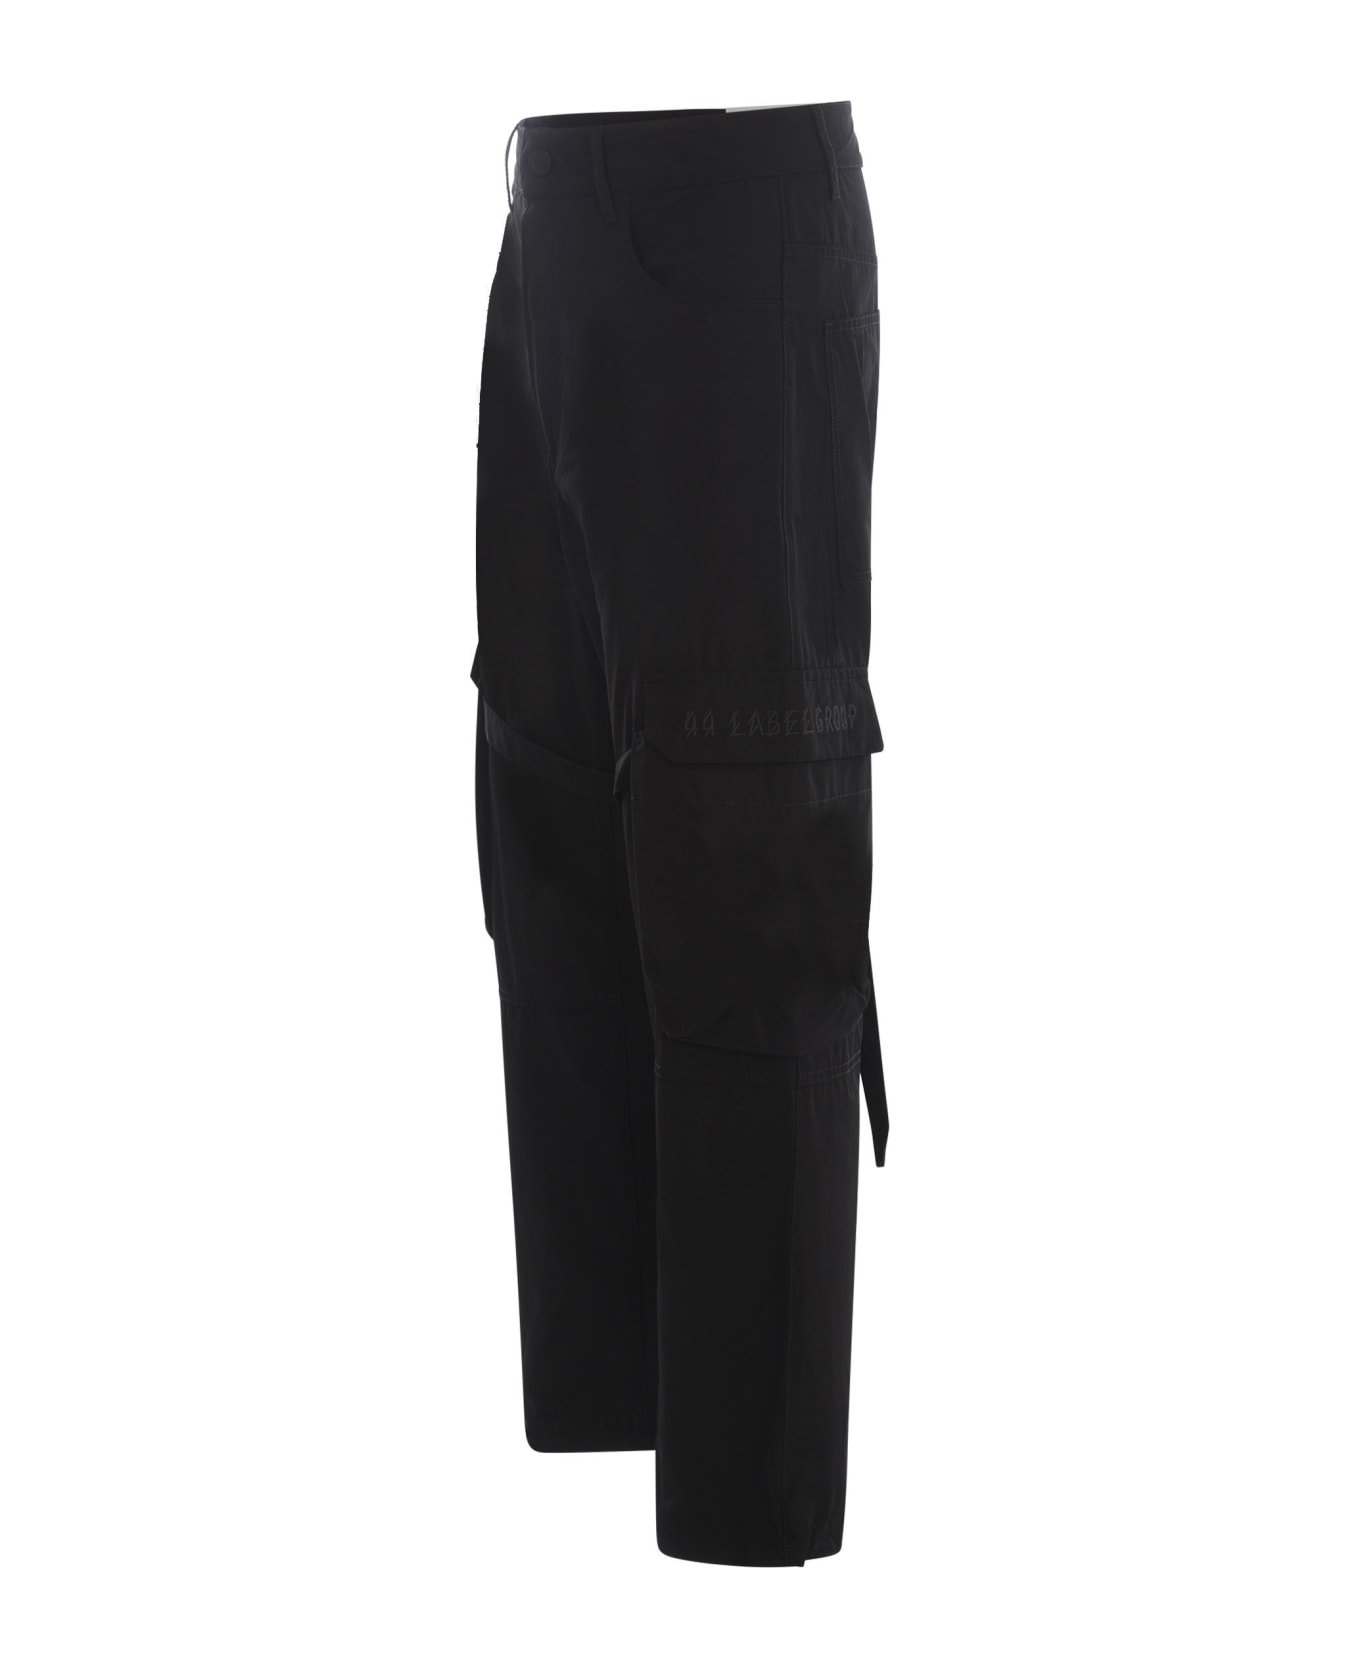 44 Label Group Trousers 44label Group In Cotton Blend - Nero